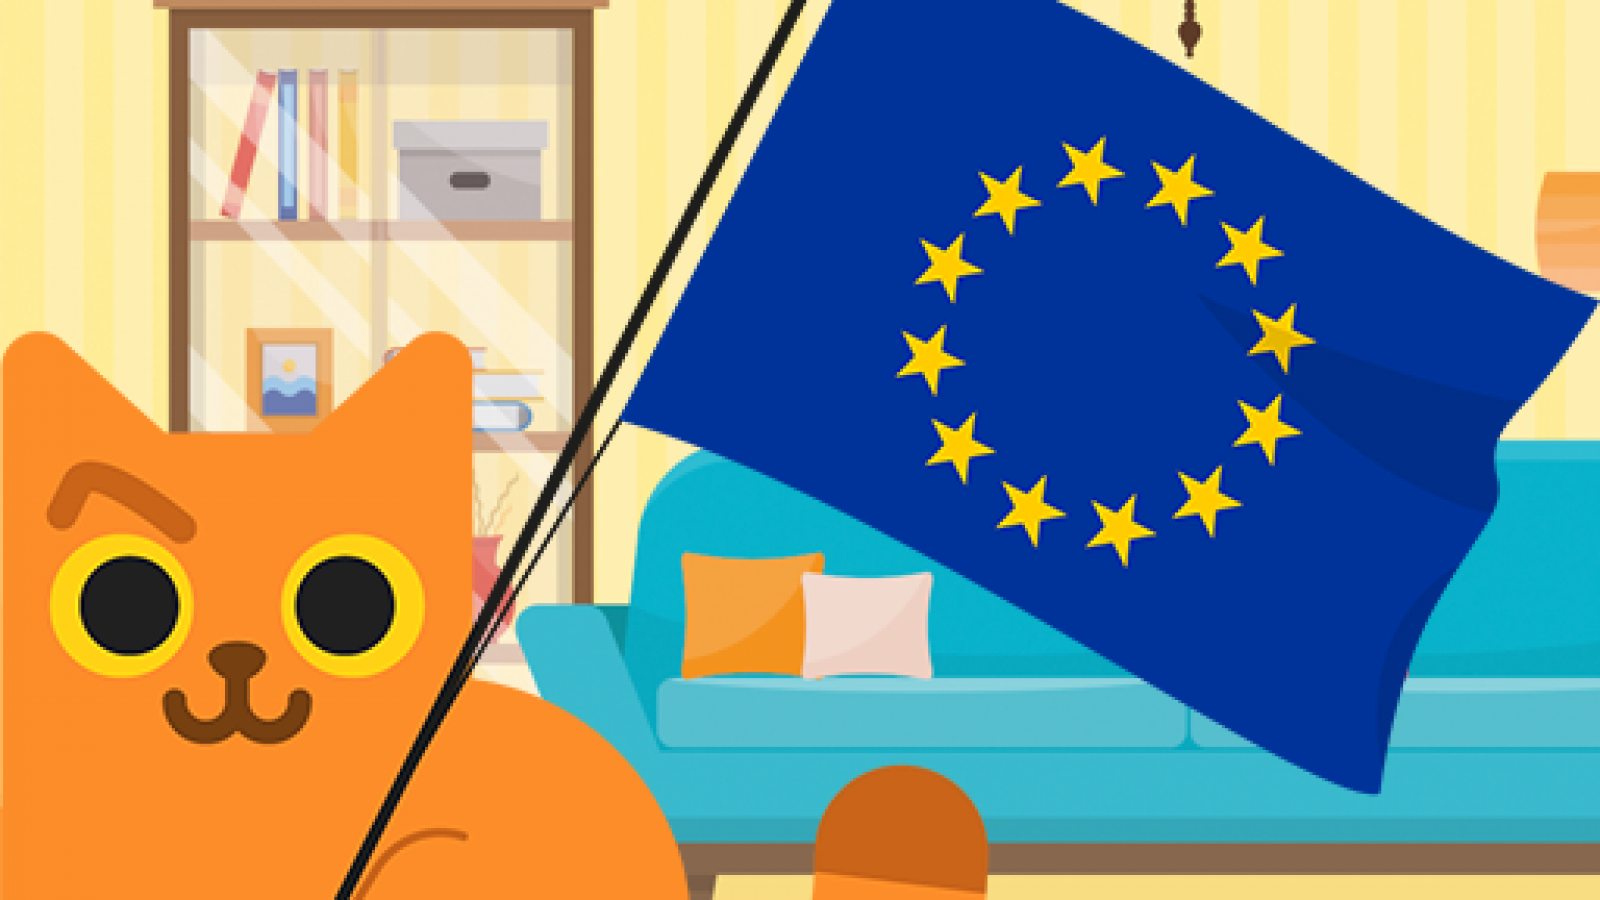 EU4Energy: Check out a new game to test your energy efficiency skills!